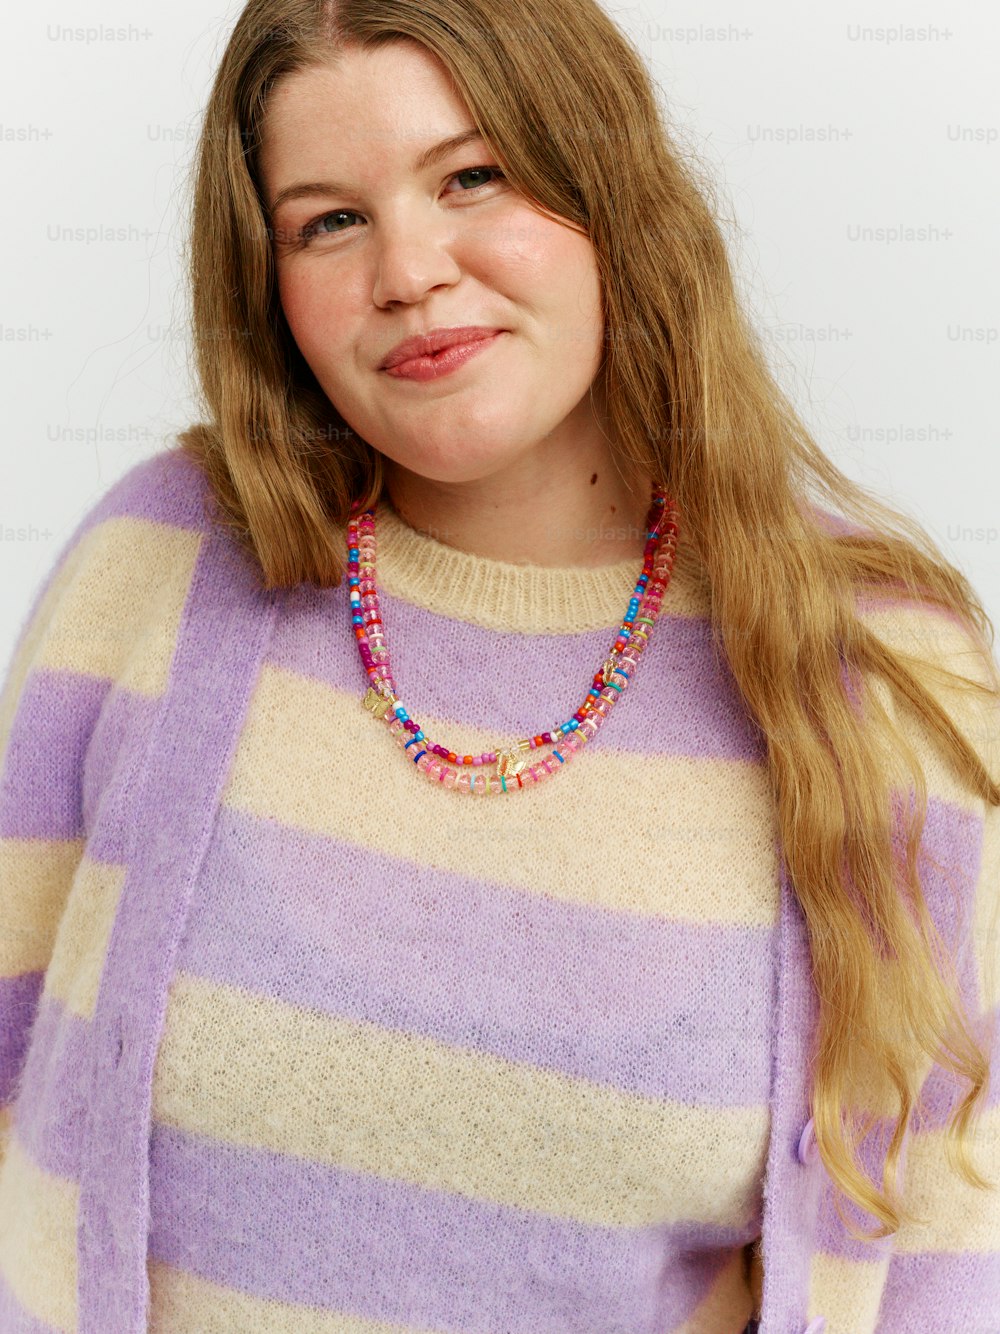 a woman with long hair wearing a sweater and a beaded necklace